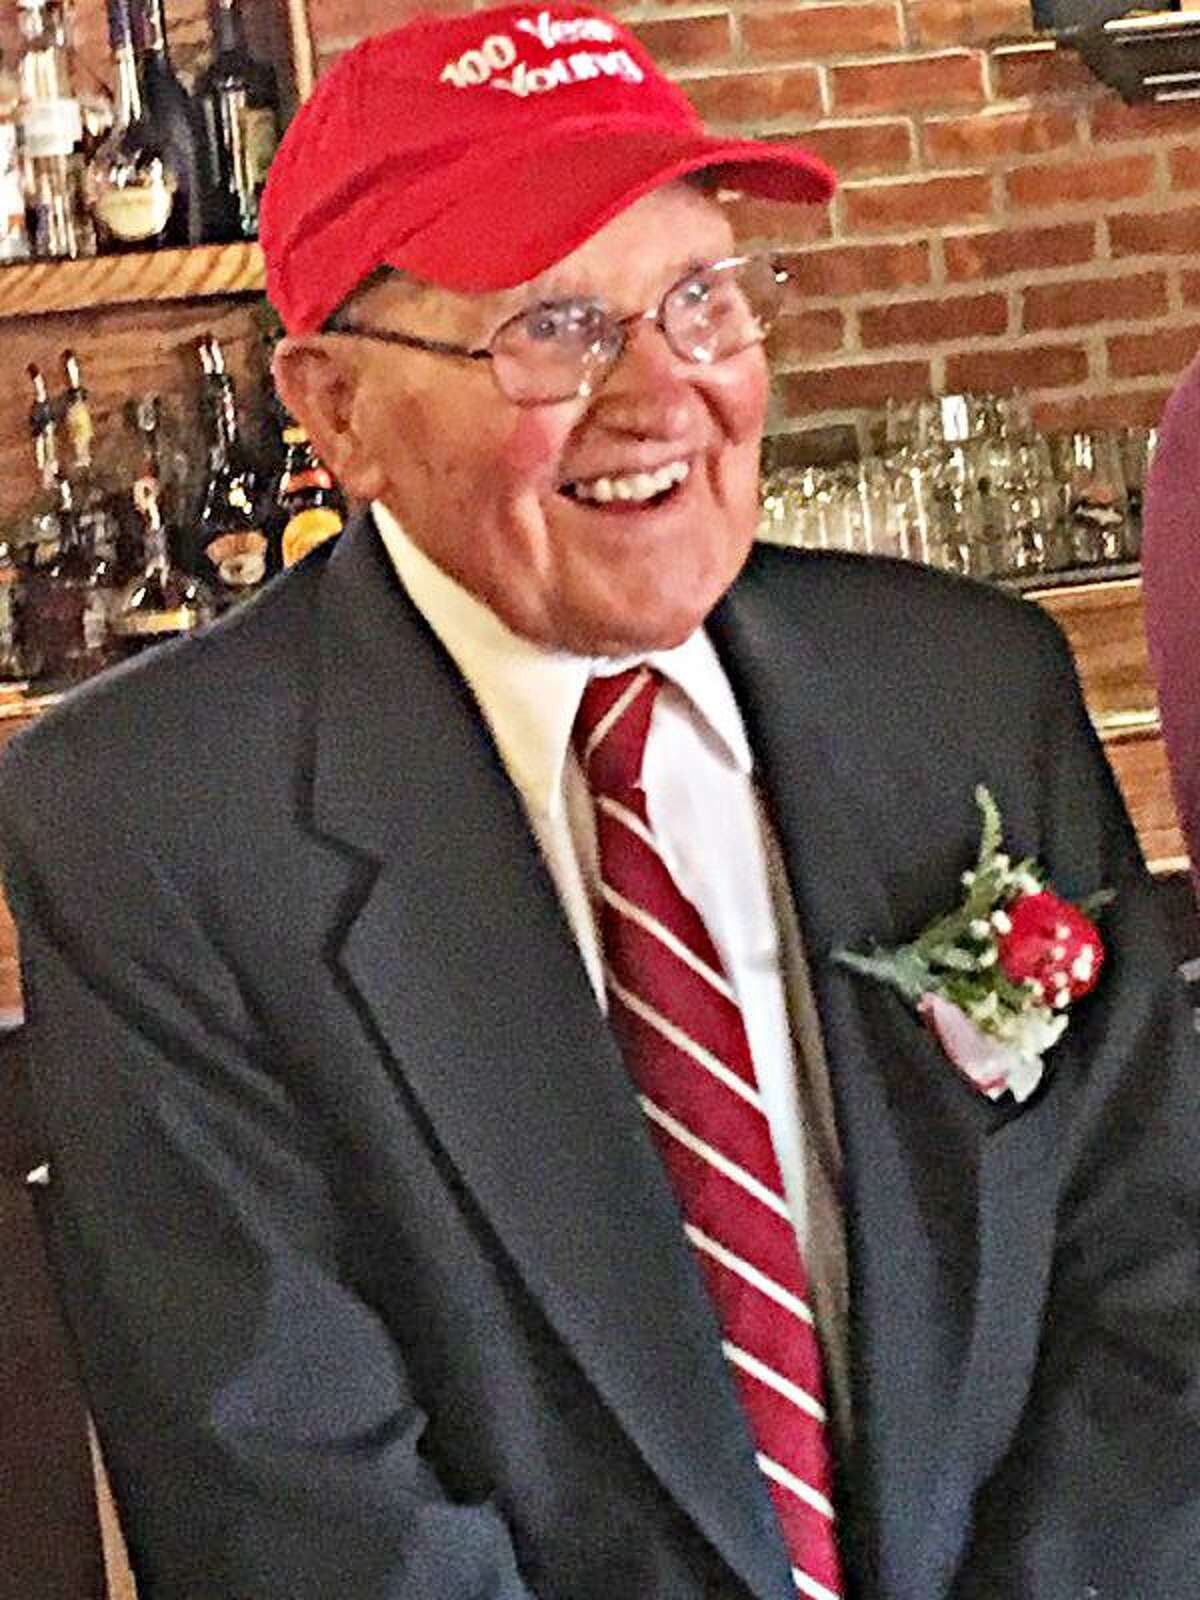 John E. Cyrulik of Middletown turned a century old earlier this week.